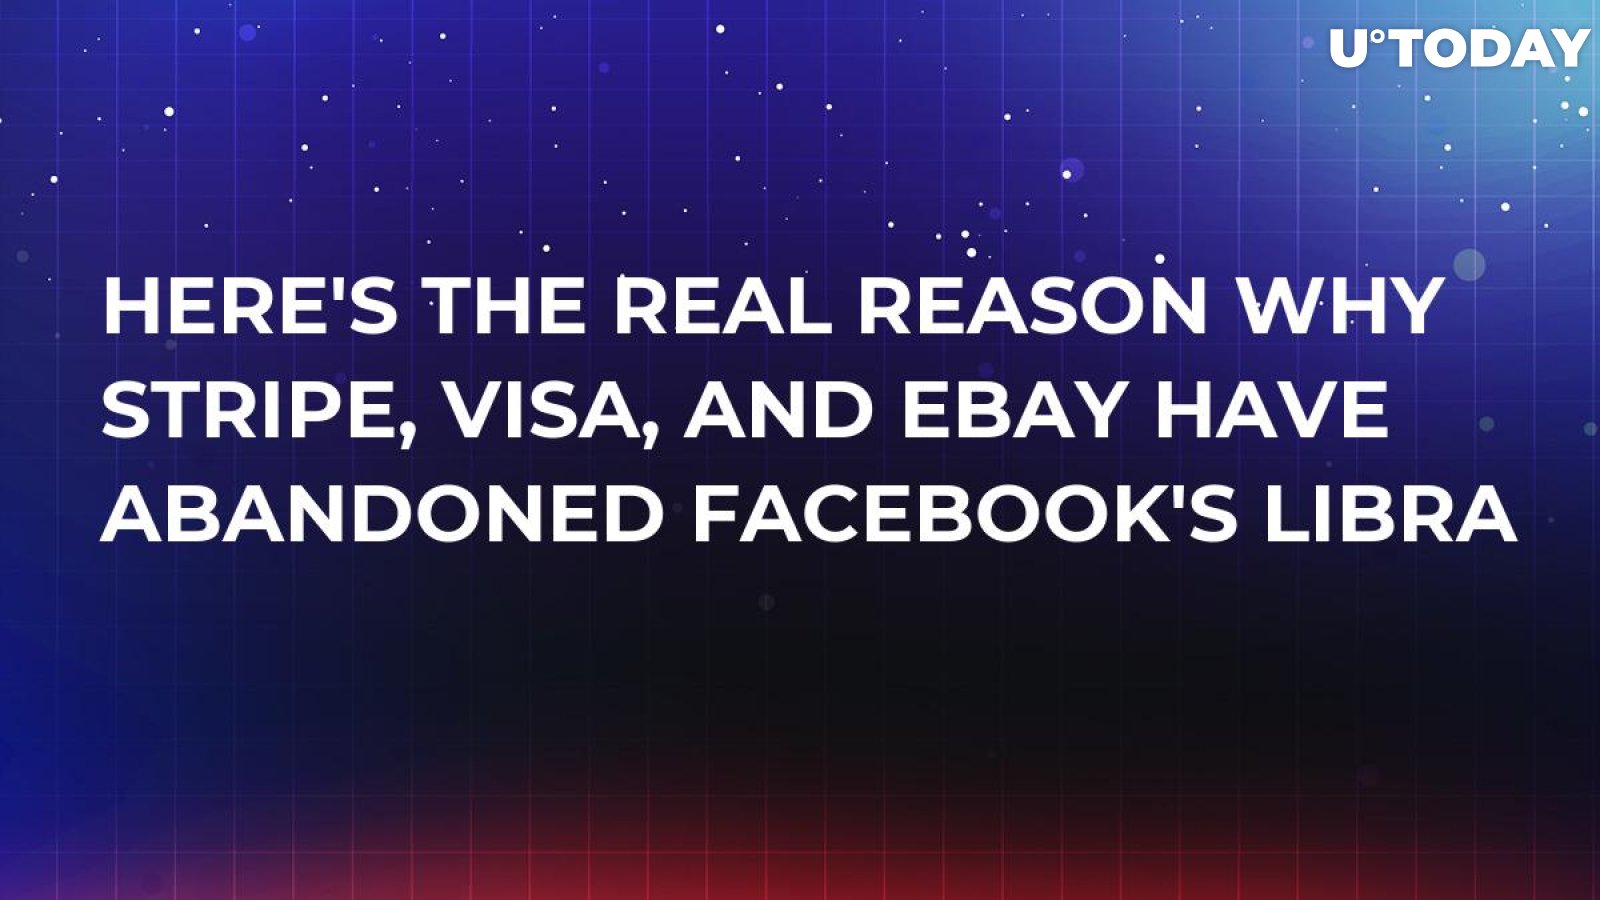 Here's the Real Reason Why Stripe, Visa, and eBay Have Abandoned Facebook's Libra 